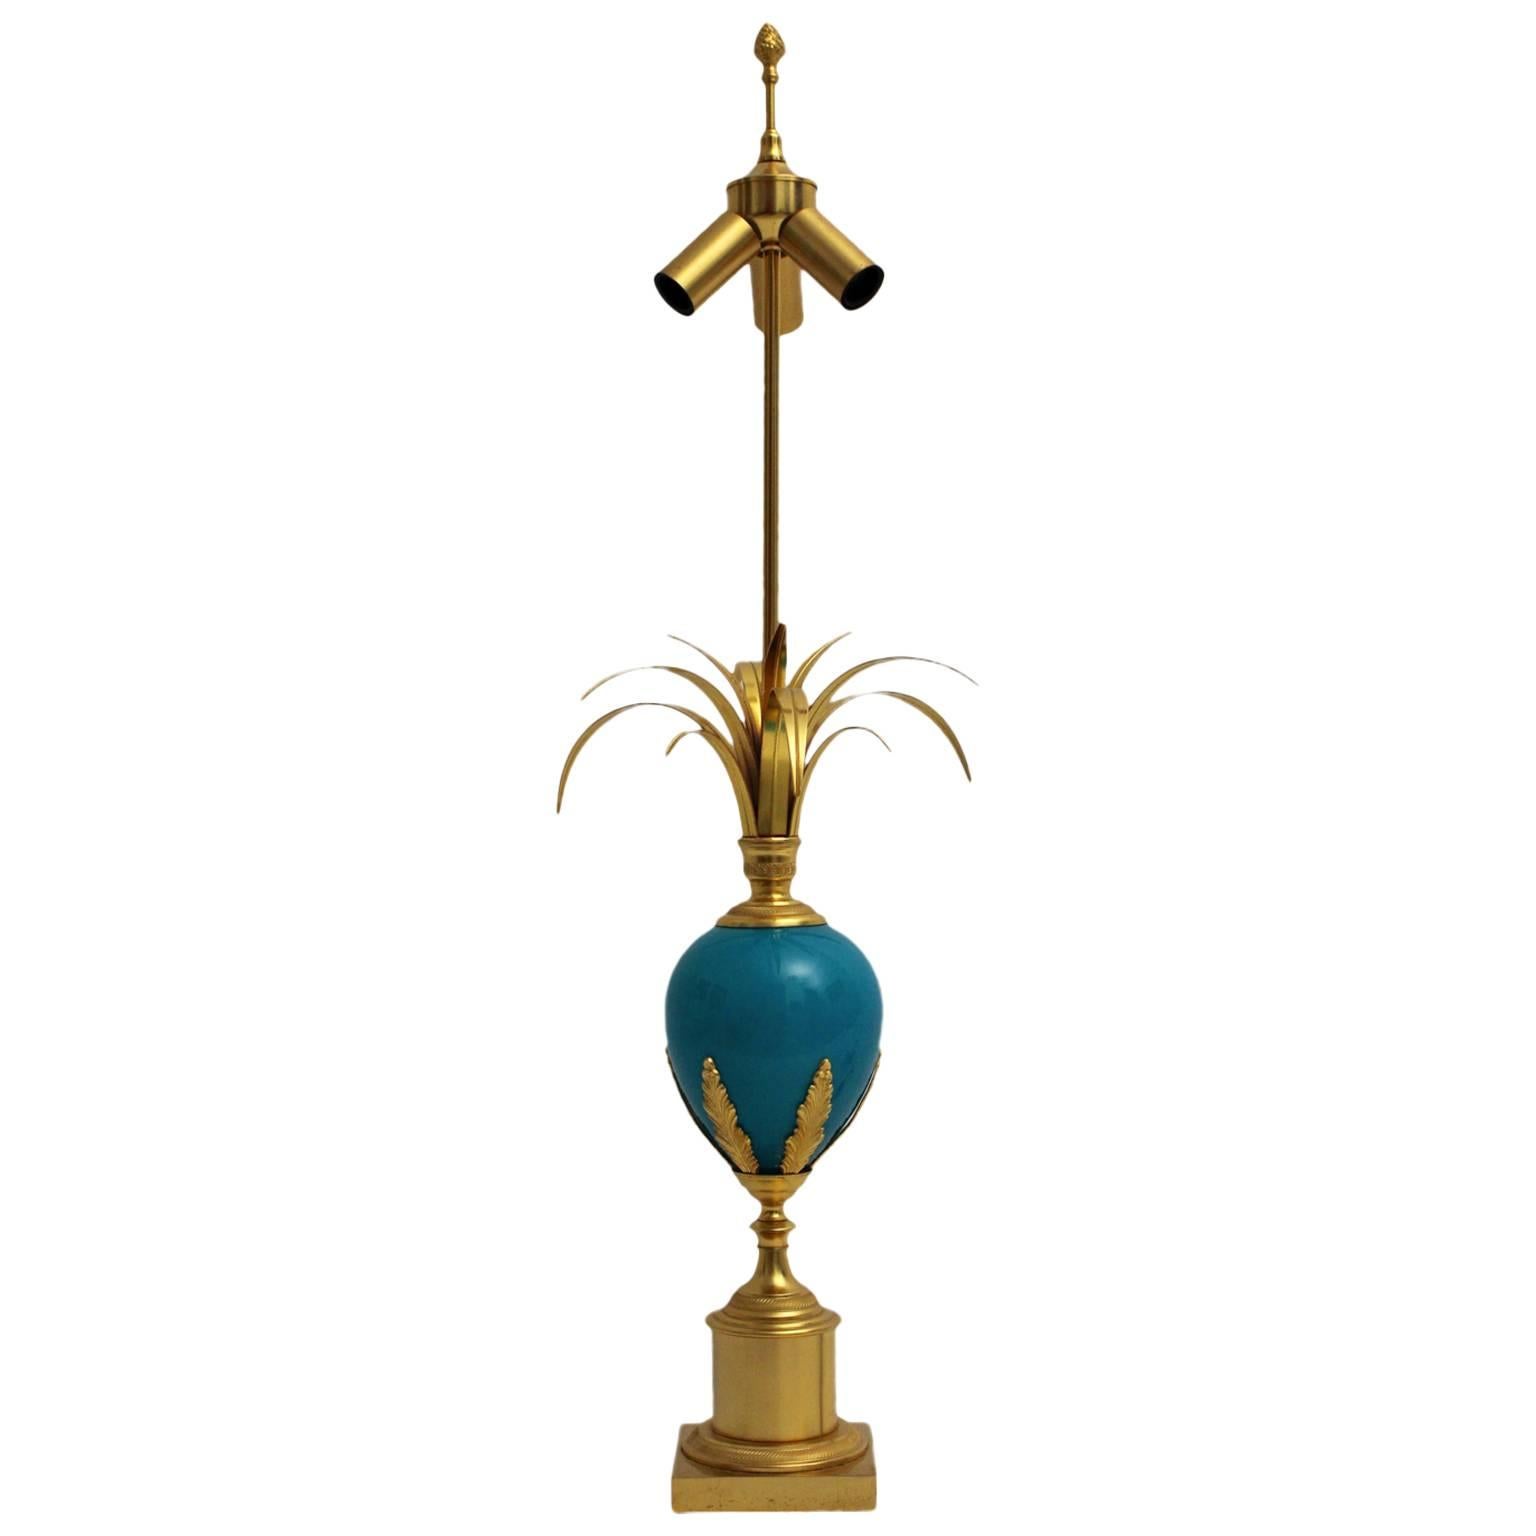 The Table lamp in the style of maison Charles is designed and manufactured circa 1970 in France.

The materials of the base is brass gilded and a turquoise glass egg decorated with brass gilded ornaments and stylized palm leaves. The lamp shade is